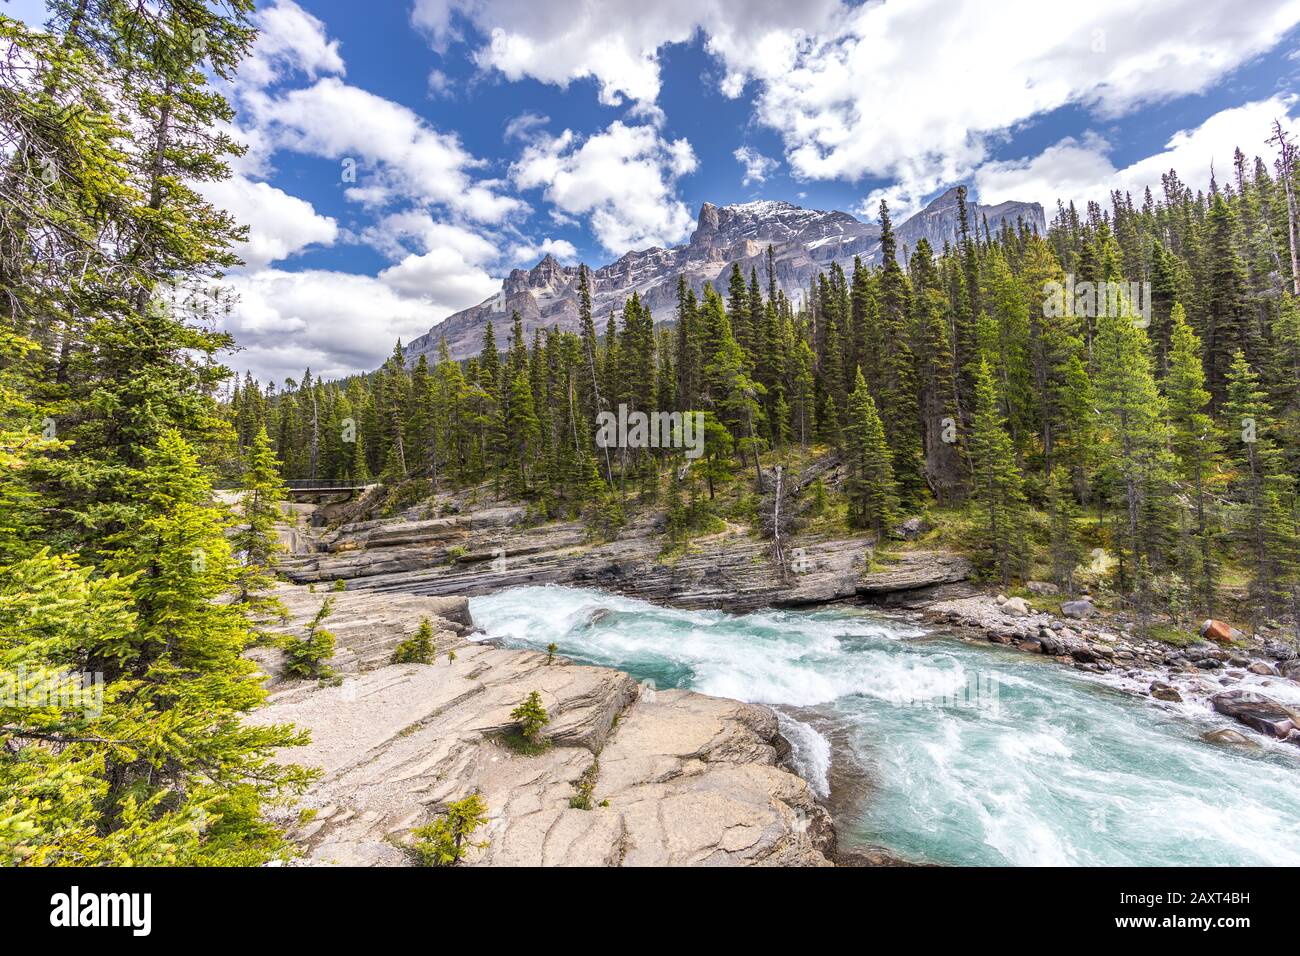 Wild water at Mistaya Canyon at Icefields Parkway, Alberta, Canada Stock Photo